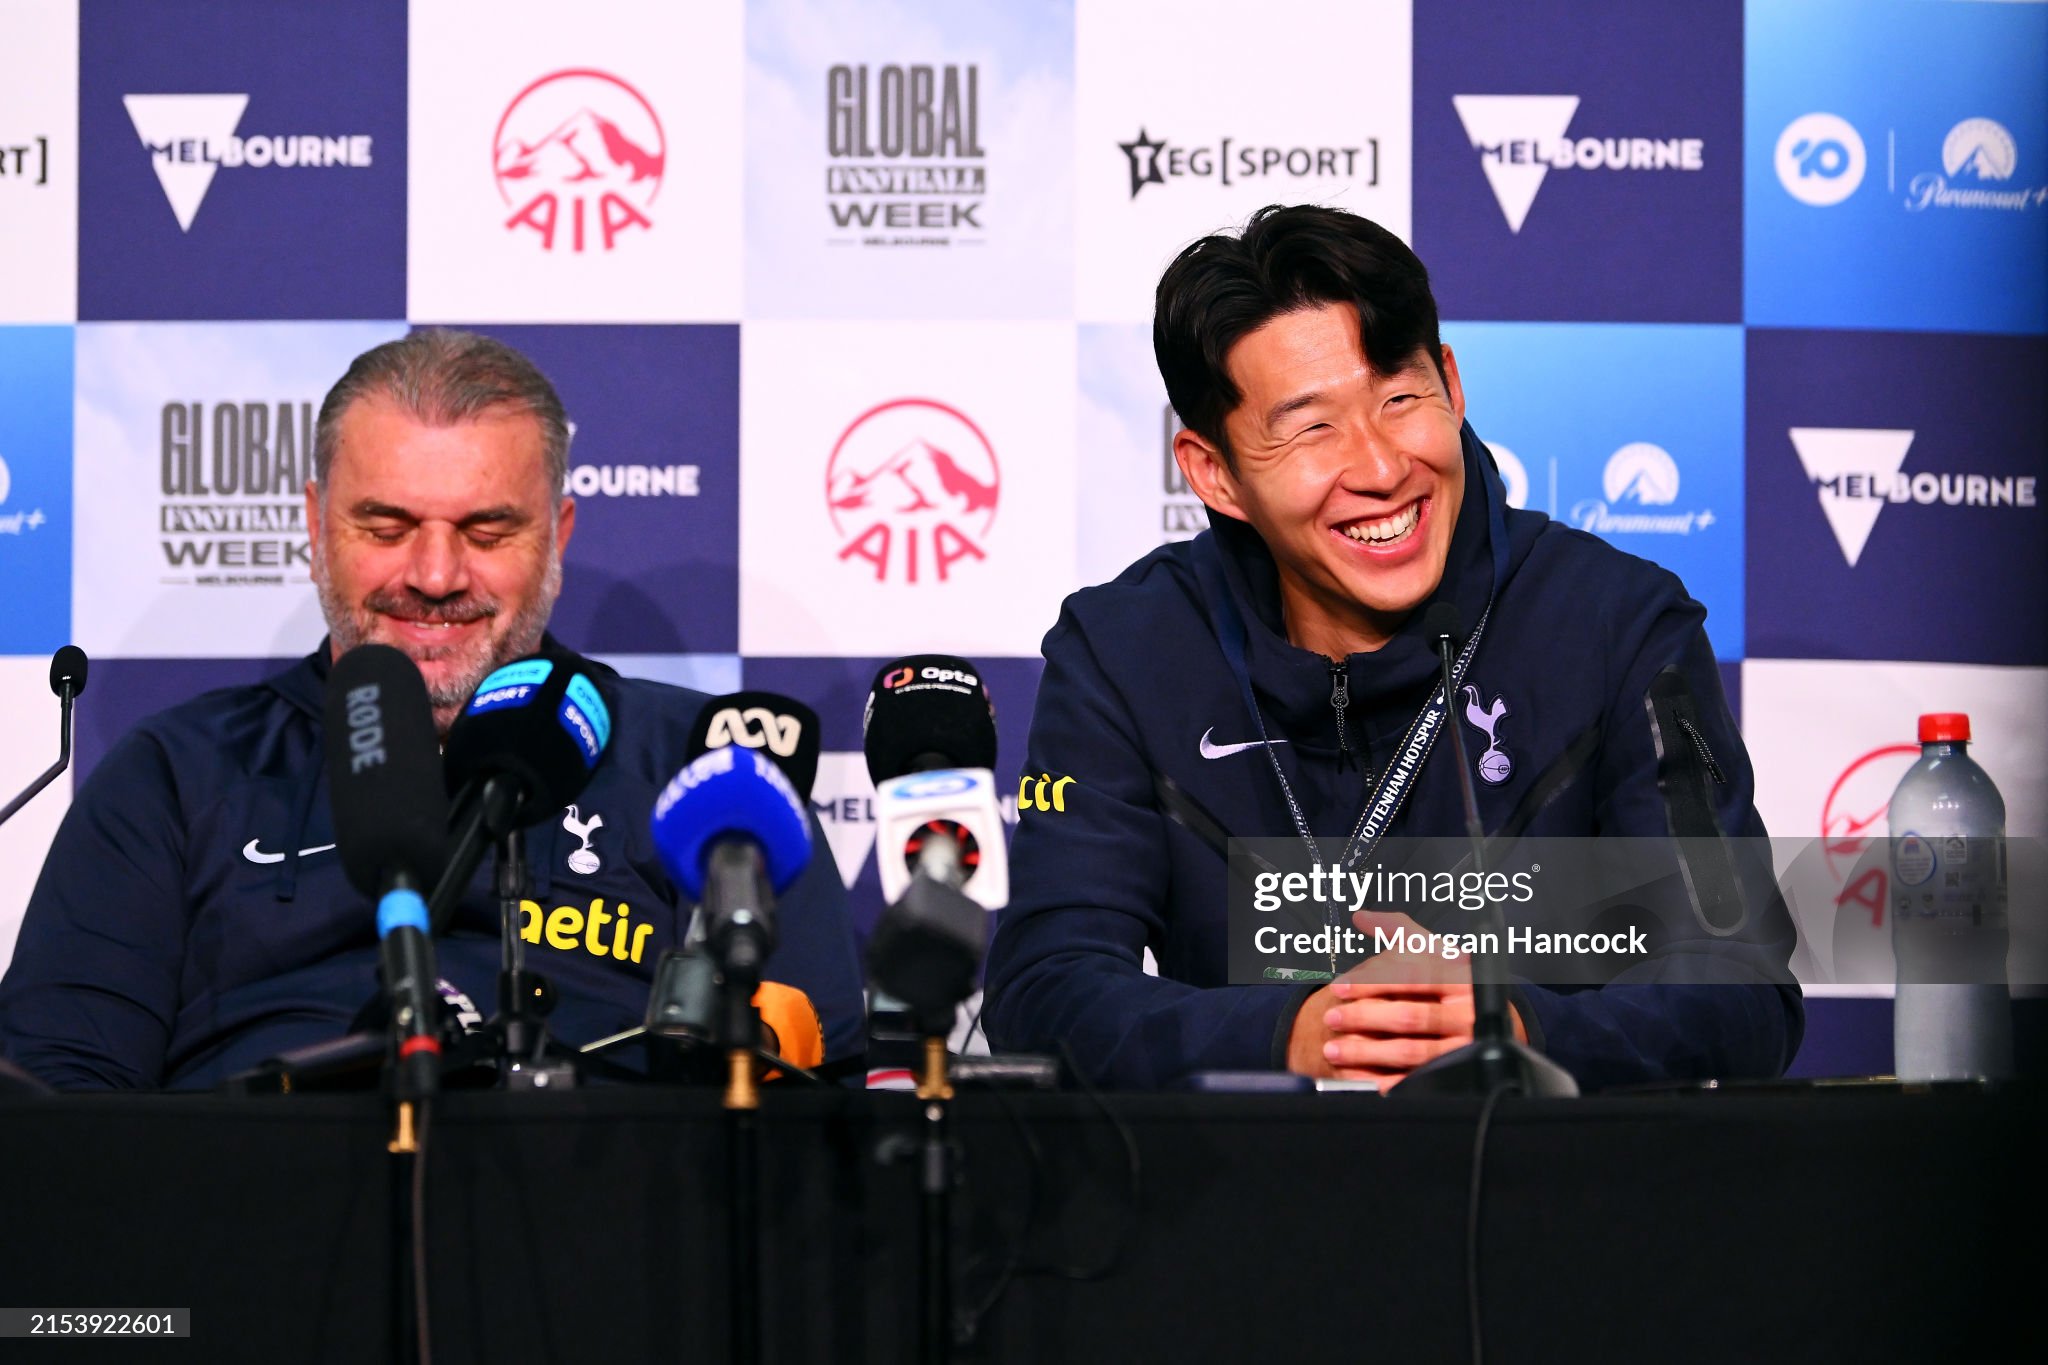 gettyimages-2153922601-2048x2048.jpg